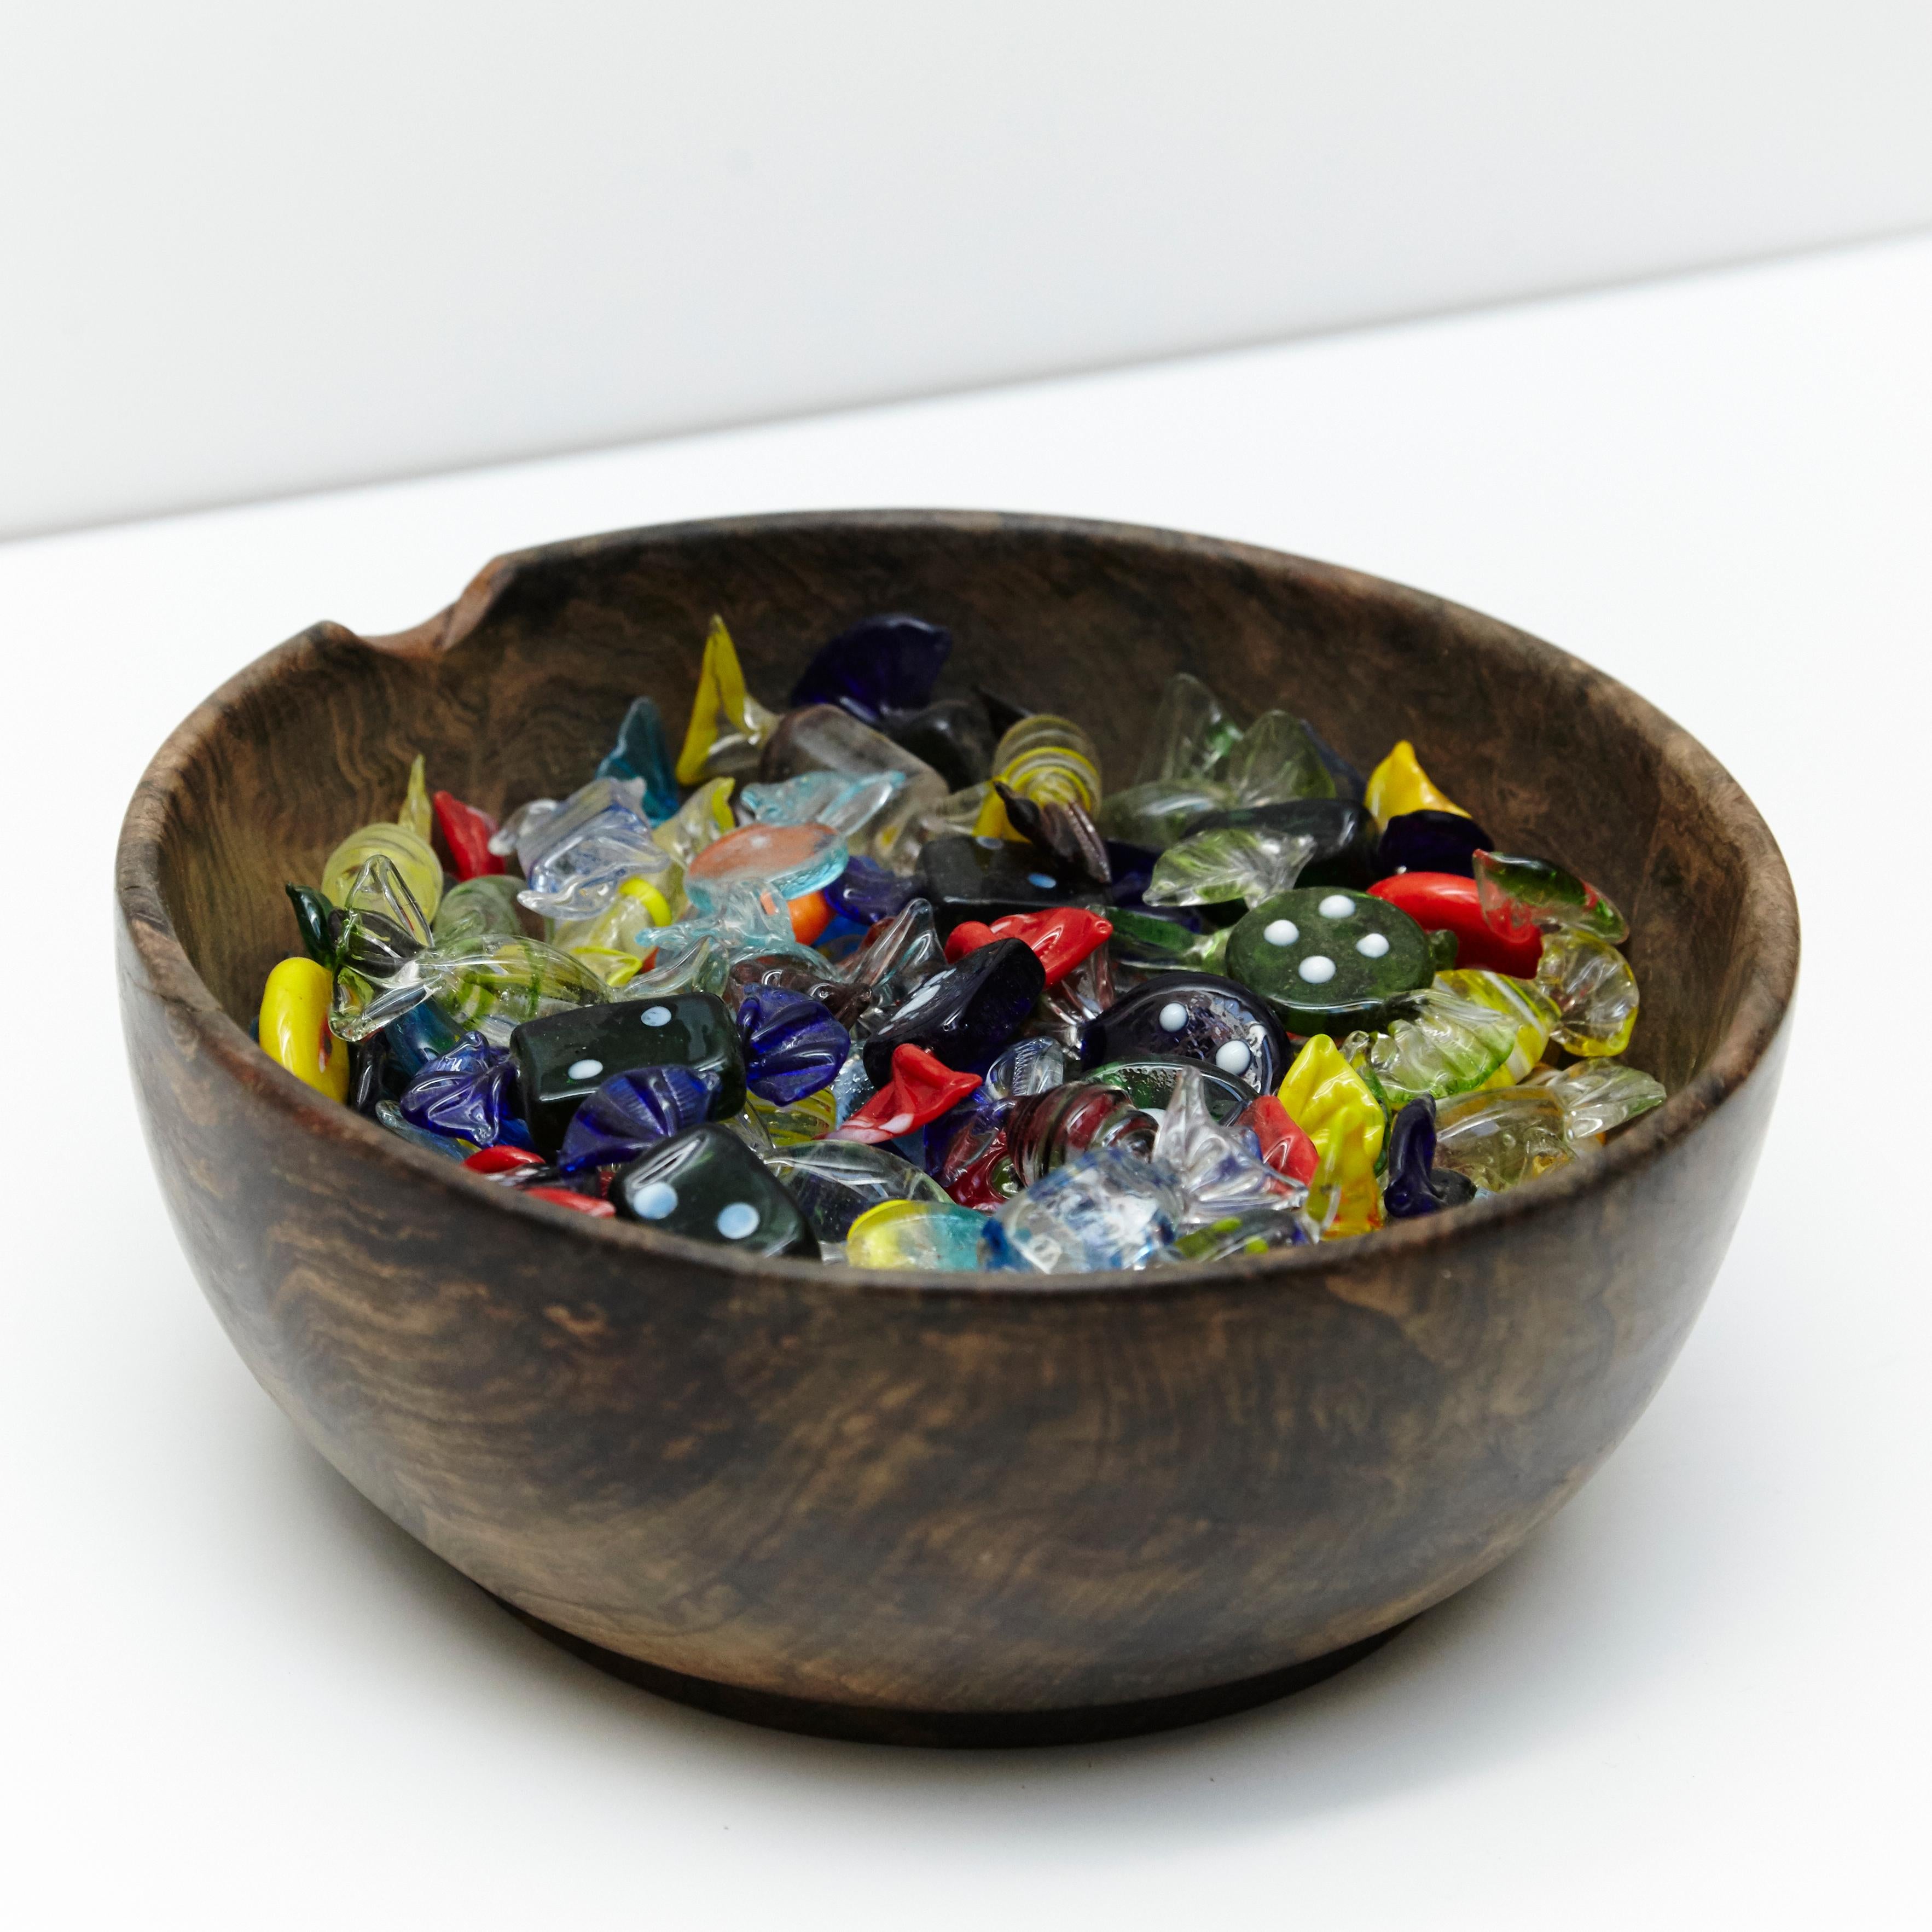 Mid-Century Modern Large Set of Murano Glass Candy Small Sculptures on Olive Wood Bowl, circa 1970